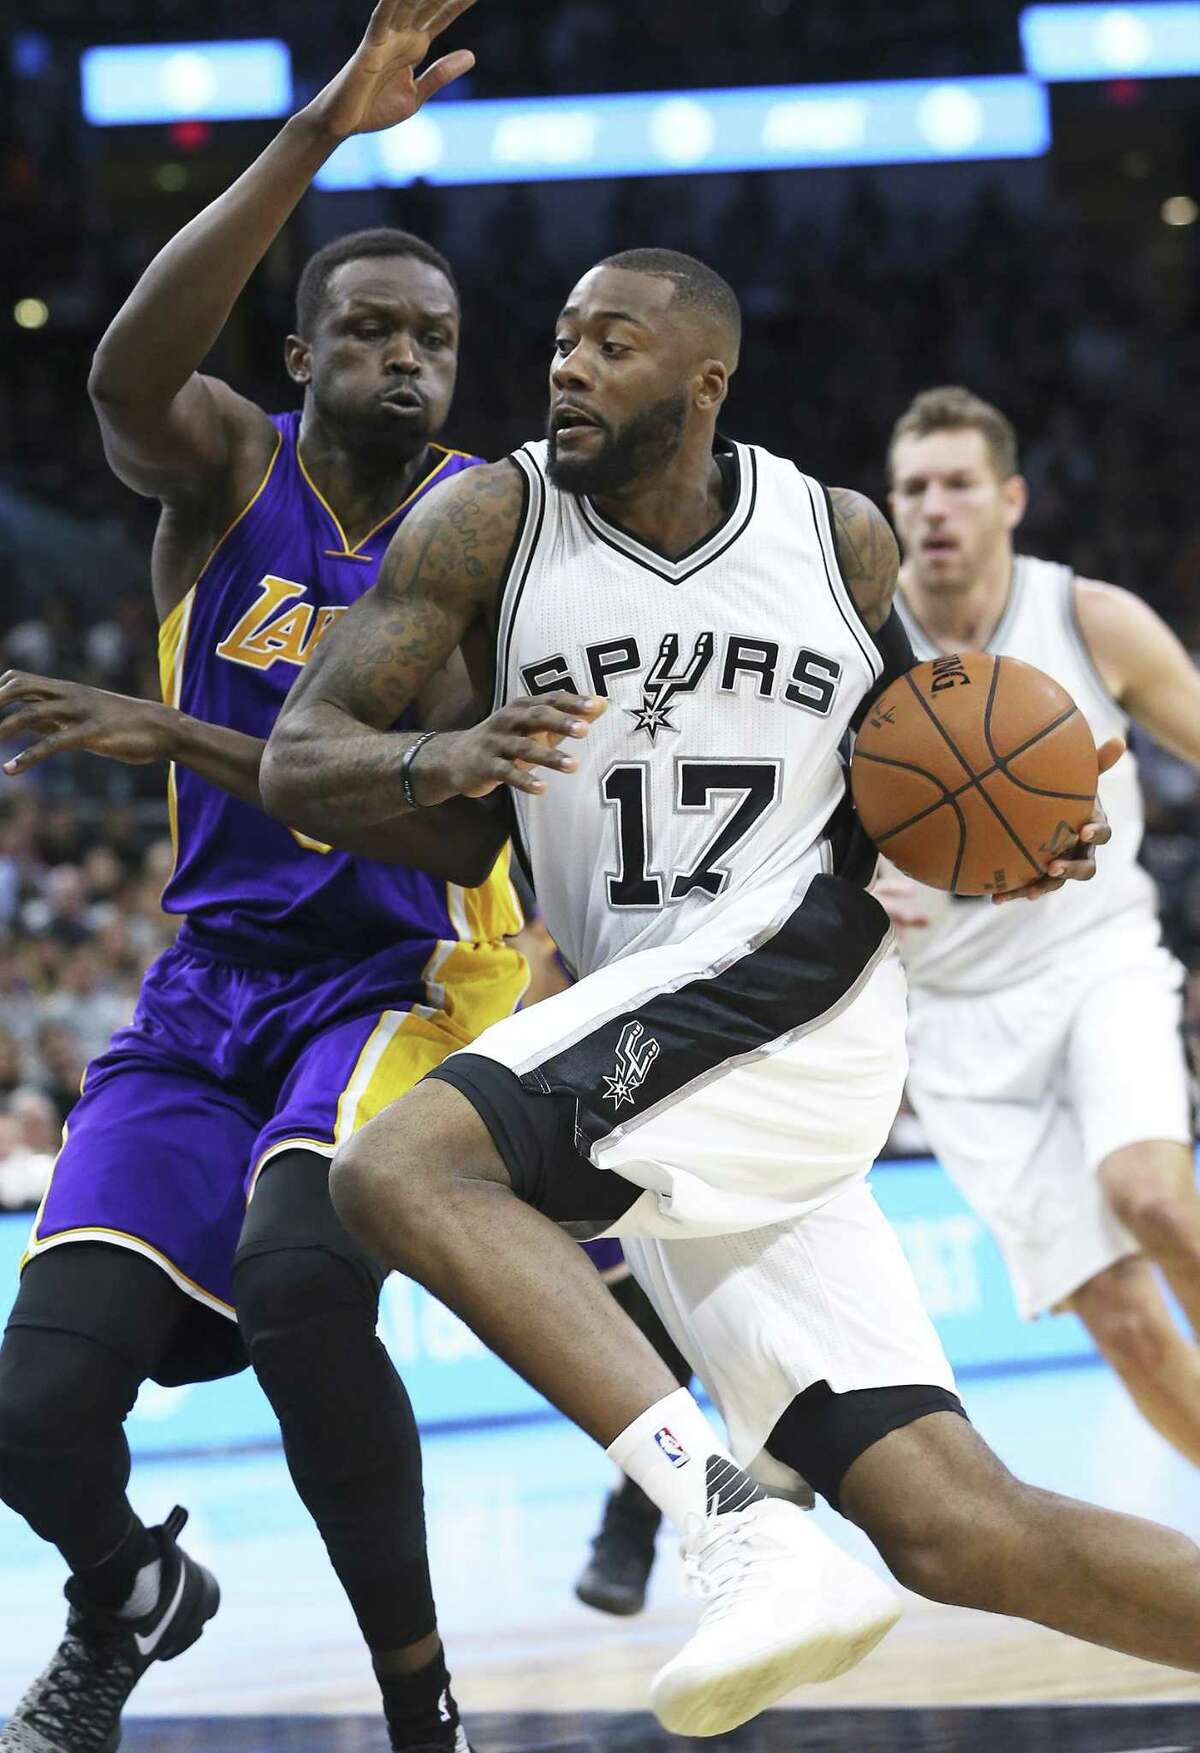 Jonathon Simmons streaks to the hoop in the first half against Luol Deng as the Spurs host the Los Angeles Lakers at the AT&T Center on Jan. 12, 2017.